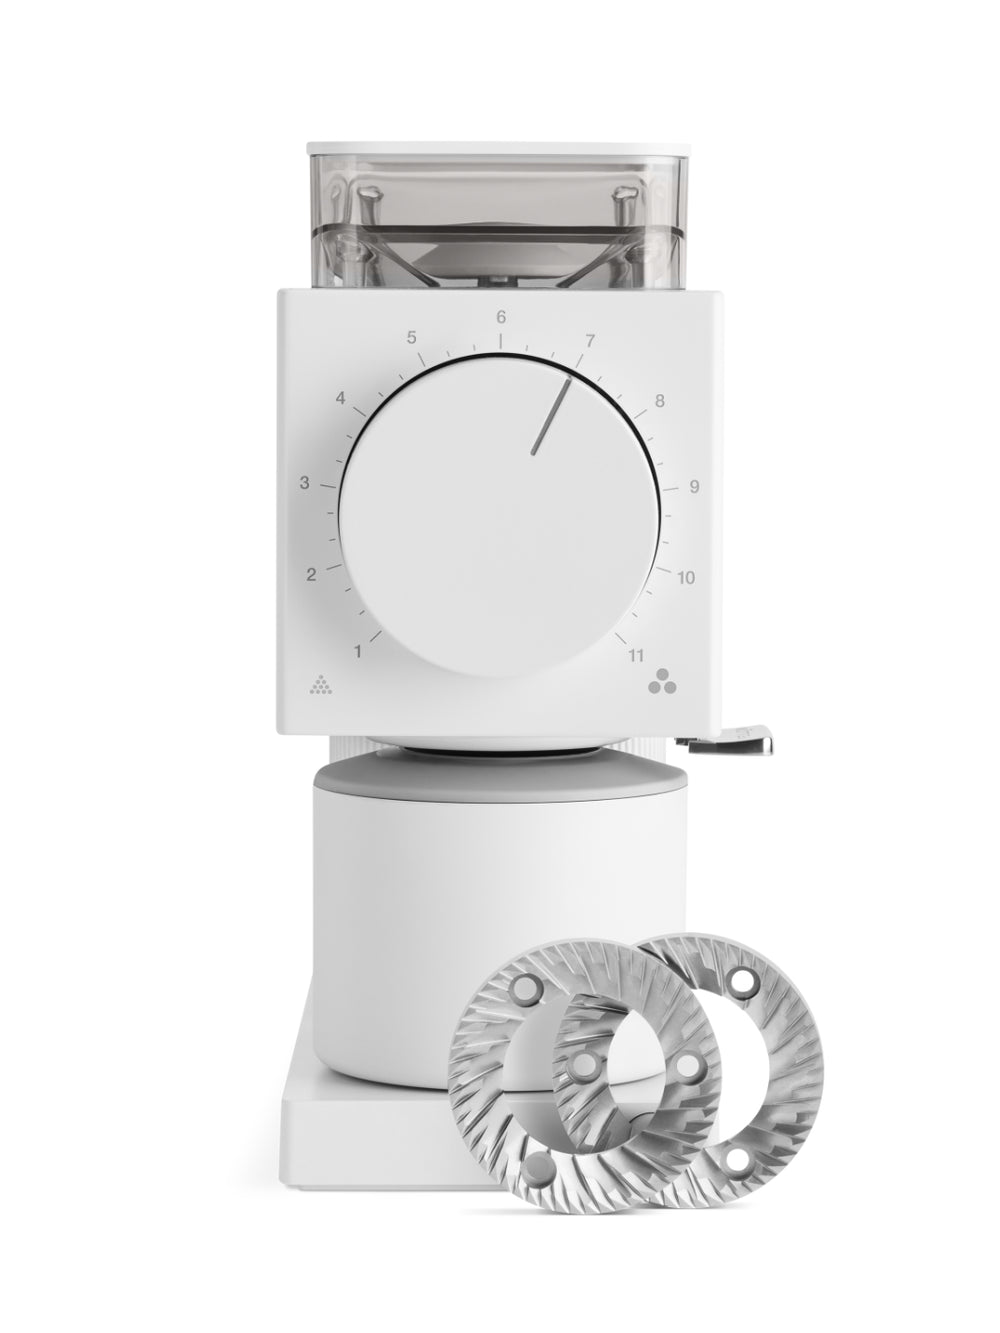 Photo of FELLOW Ode Brew Grinder (Gen 2.0) (120V) ( Matte White ) [ Fellow ] [ Electric Grinders ]